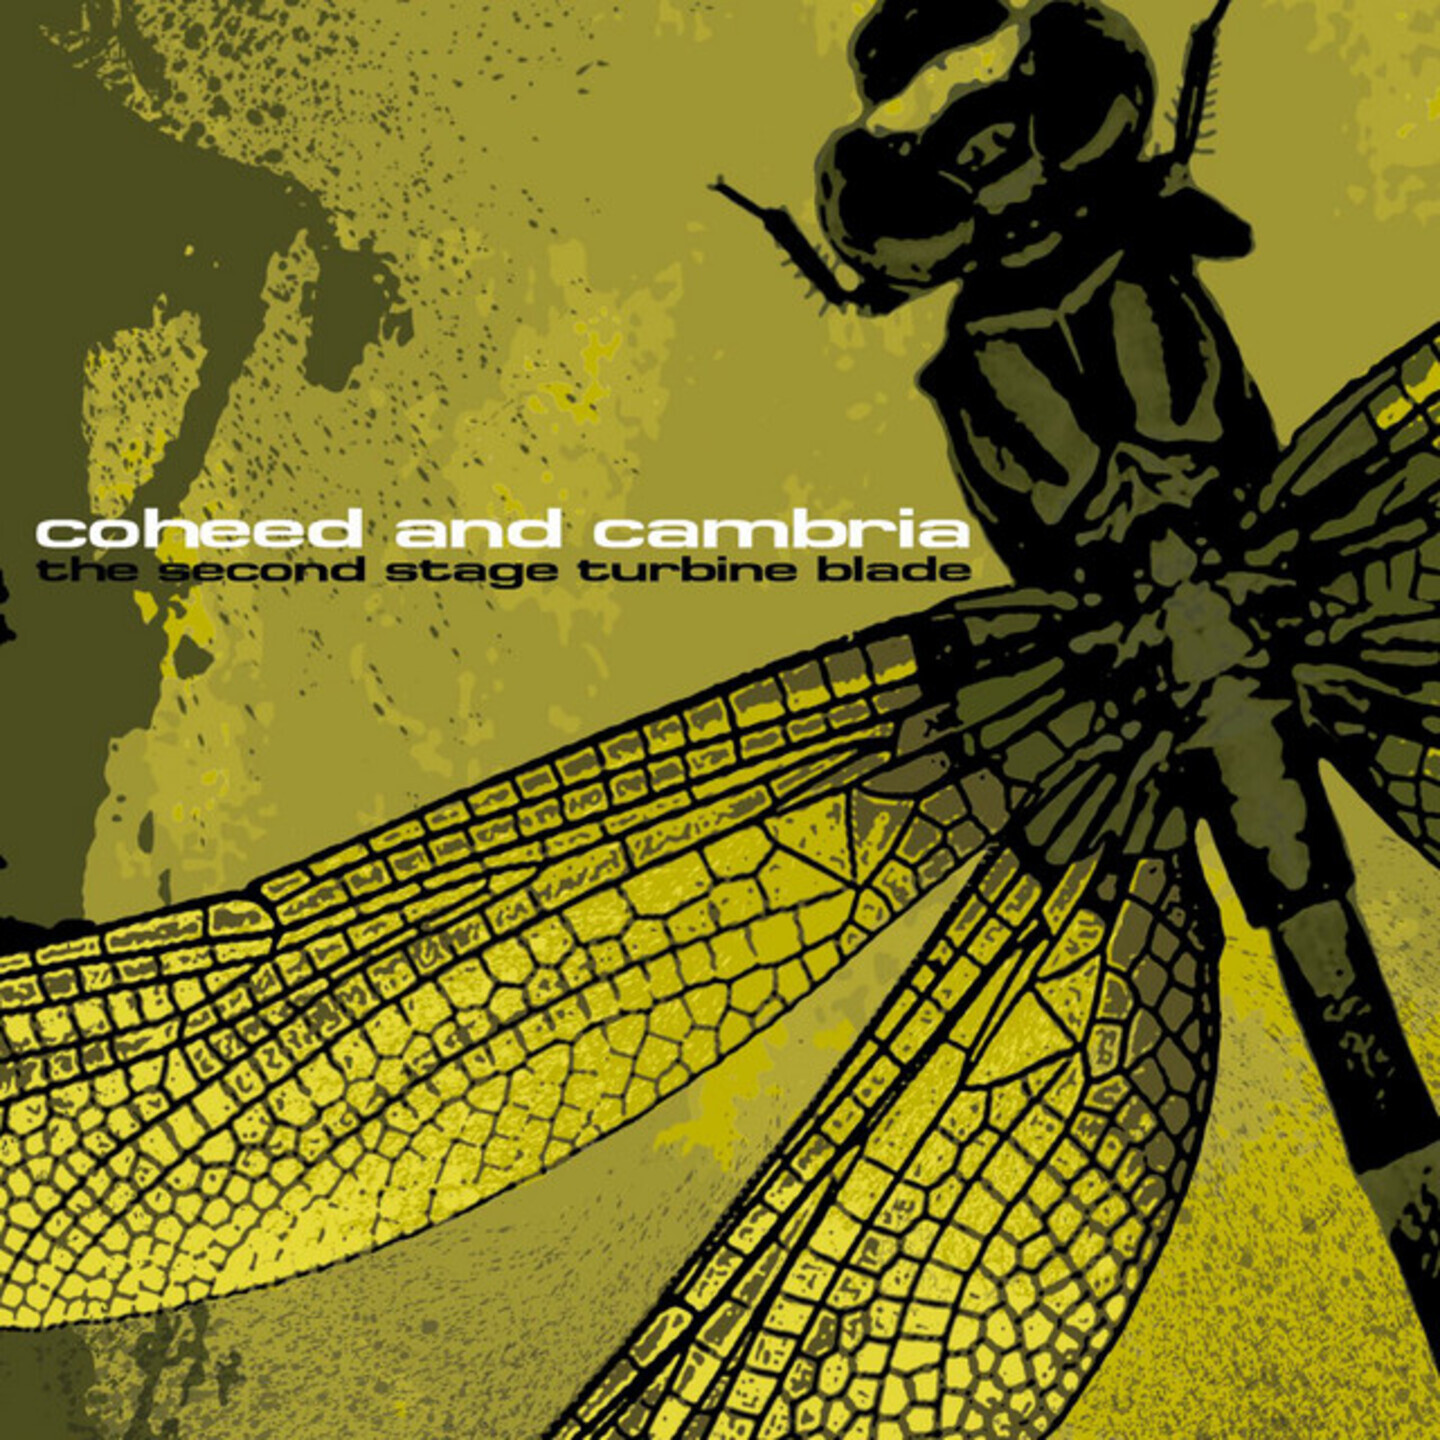 COHEED AND CAMBRIA - The Second Stage Turbine Blade LP (20th Anniversary)(Translucent Black vinyl)